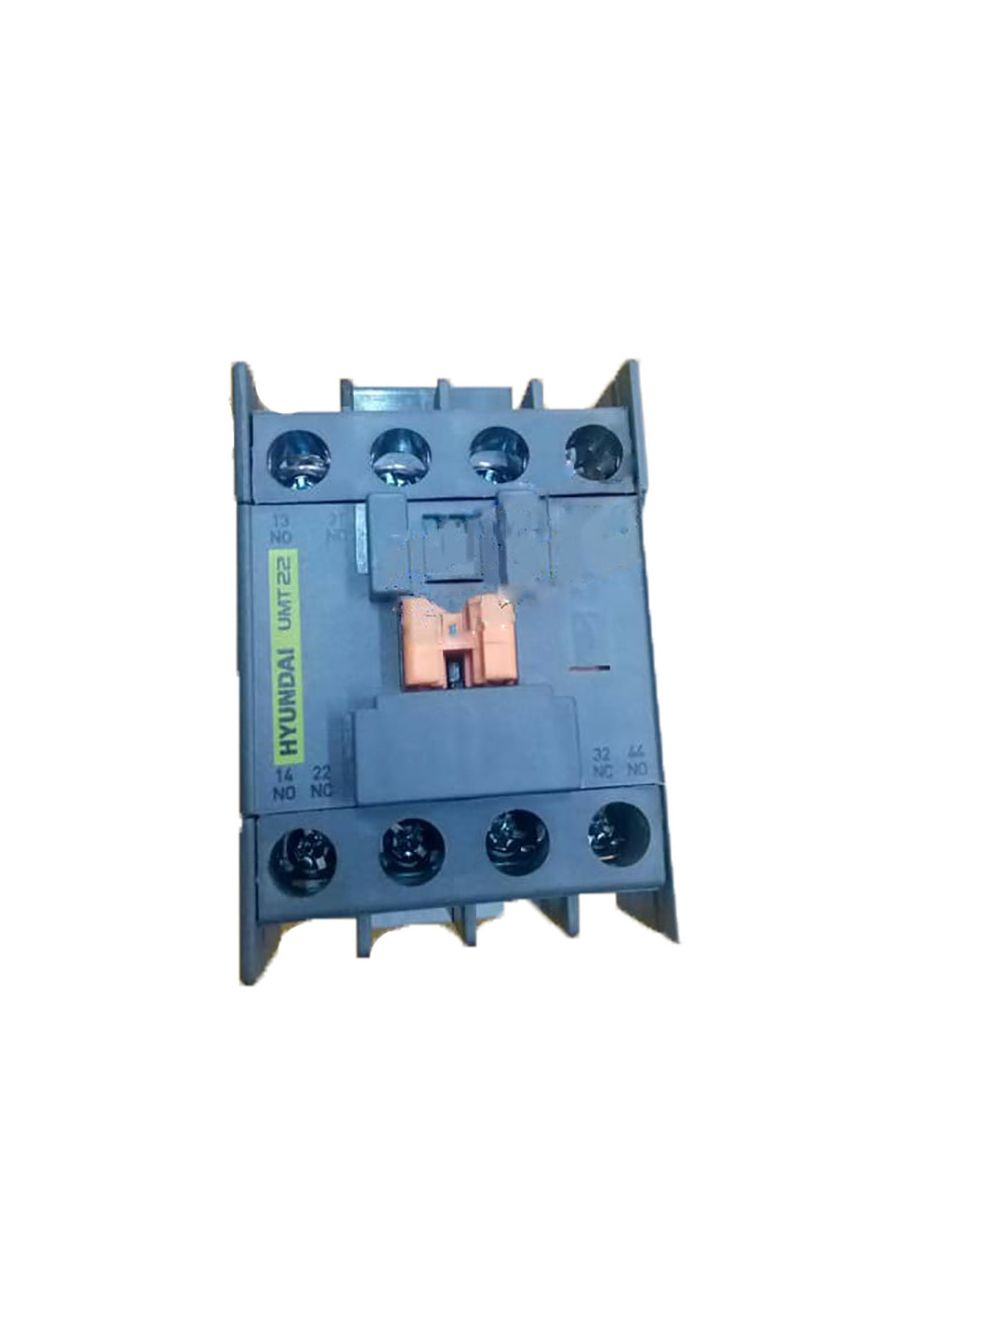 New In stock for sale, HYUNDAI Contactor UMT22